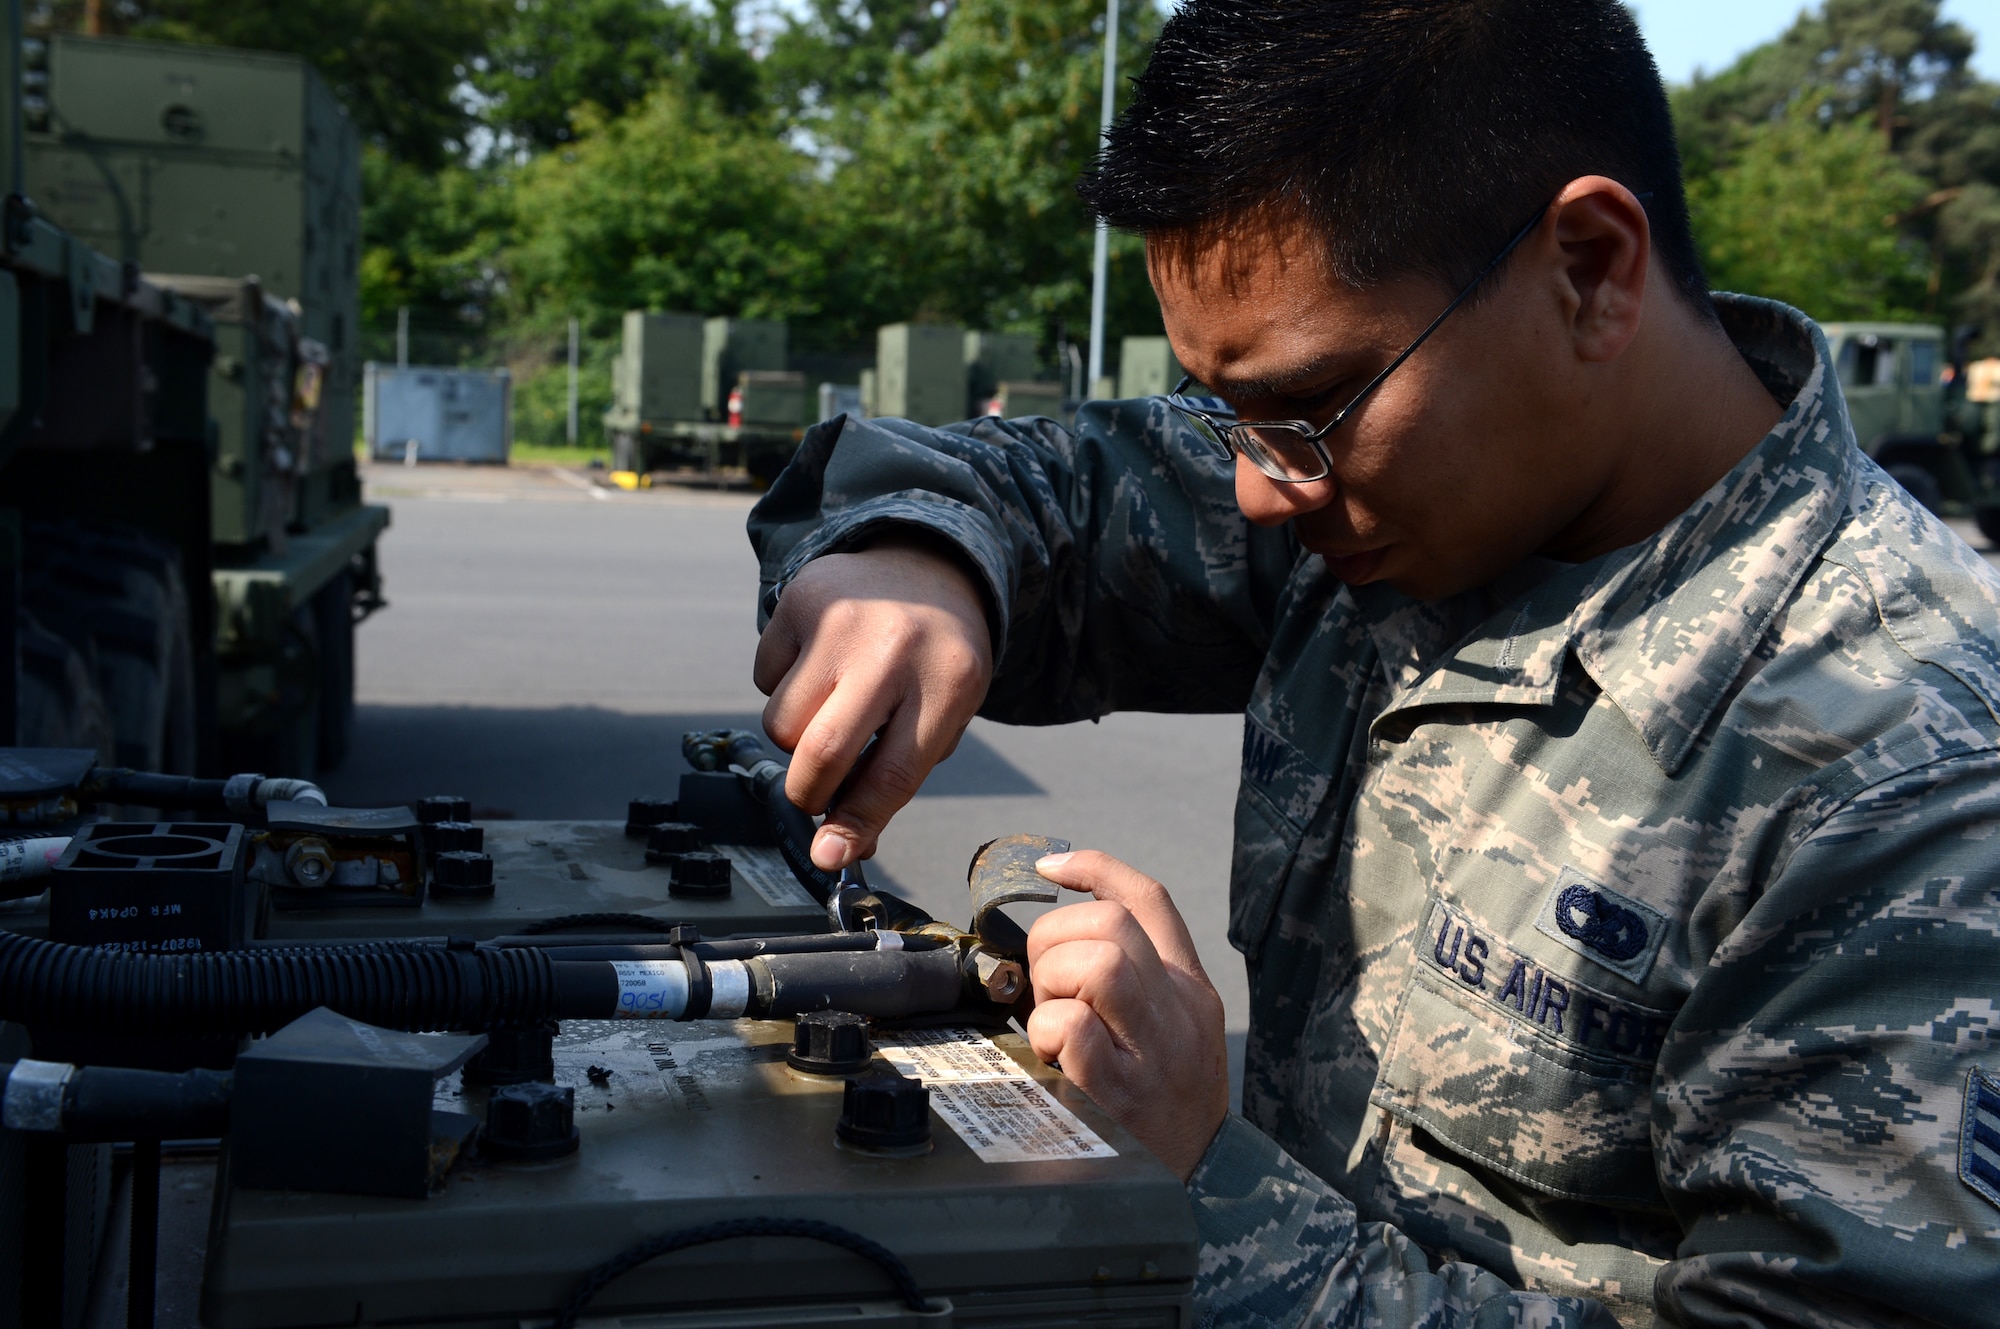 U.S. Air Force Senior Airman Andrew Bayani, 606th Air Control Squadron vehicle maintenance technician, disconnects a battery from a truck at Spangdahlem Air Base, Germany, June 2, 2014. Bayani performed maintenance on the trucks in preparation for a convoy to Powidz Air Base, Poland. The 606th ACS is providing valuable air control during Poland’s Exercise EAGLE TALON and the U.S. Aviation Detachment Rotation 14-3, both routine exercises that increase interoperability through training with NATO partners.  (U.S. Air Force photo by Airman 1st Class Kyle Gese/Released)